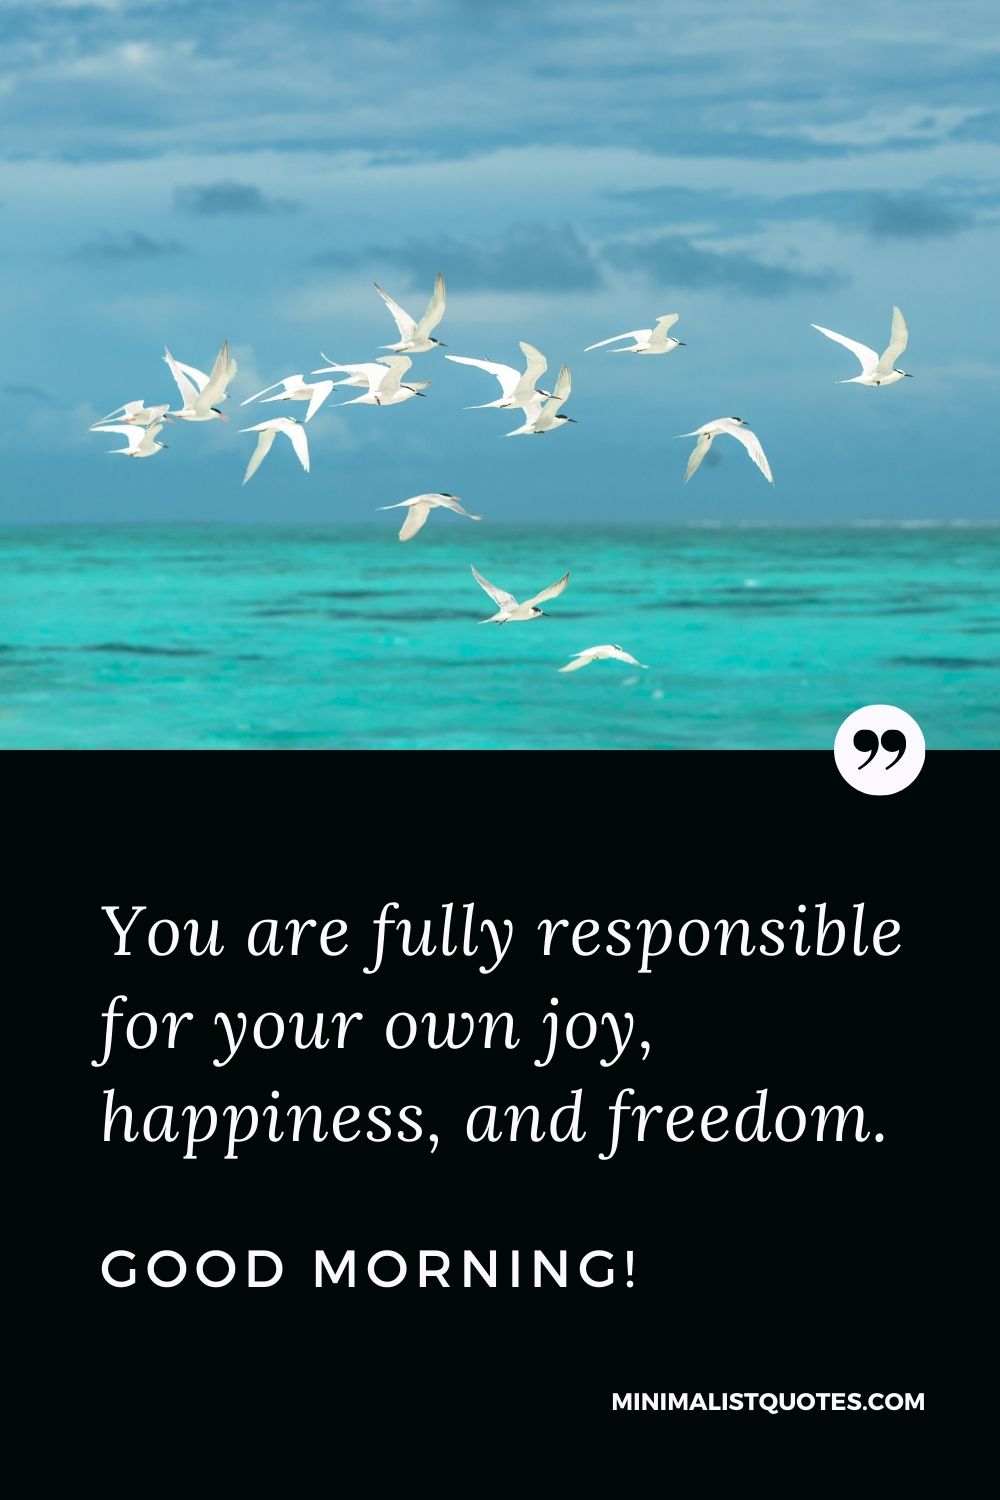 Morning Quote, Wish & Message With Image: You are fully responsible for your own joy, happiness, and freedom. Good Morning!